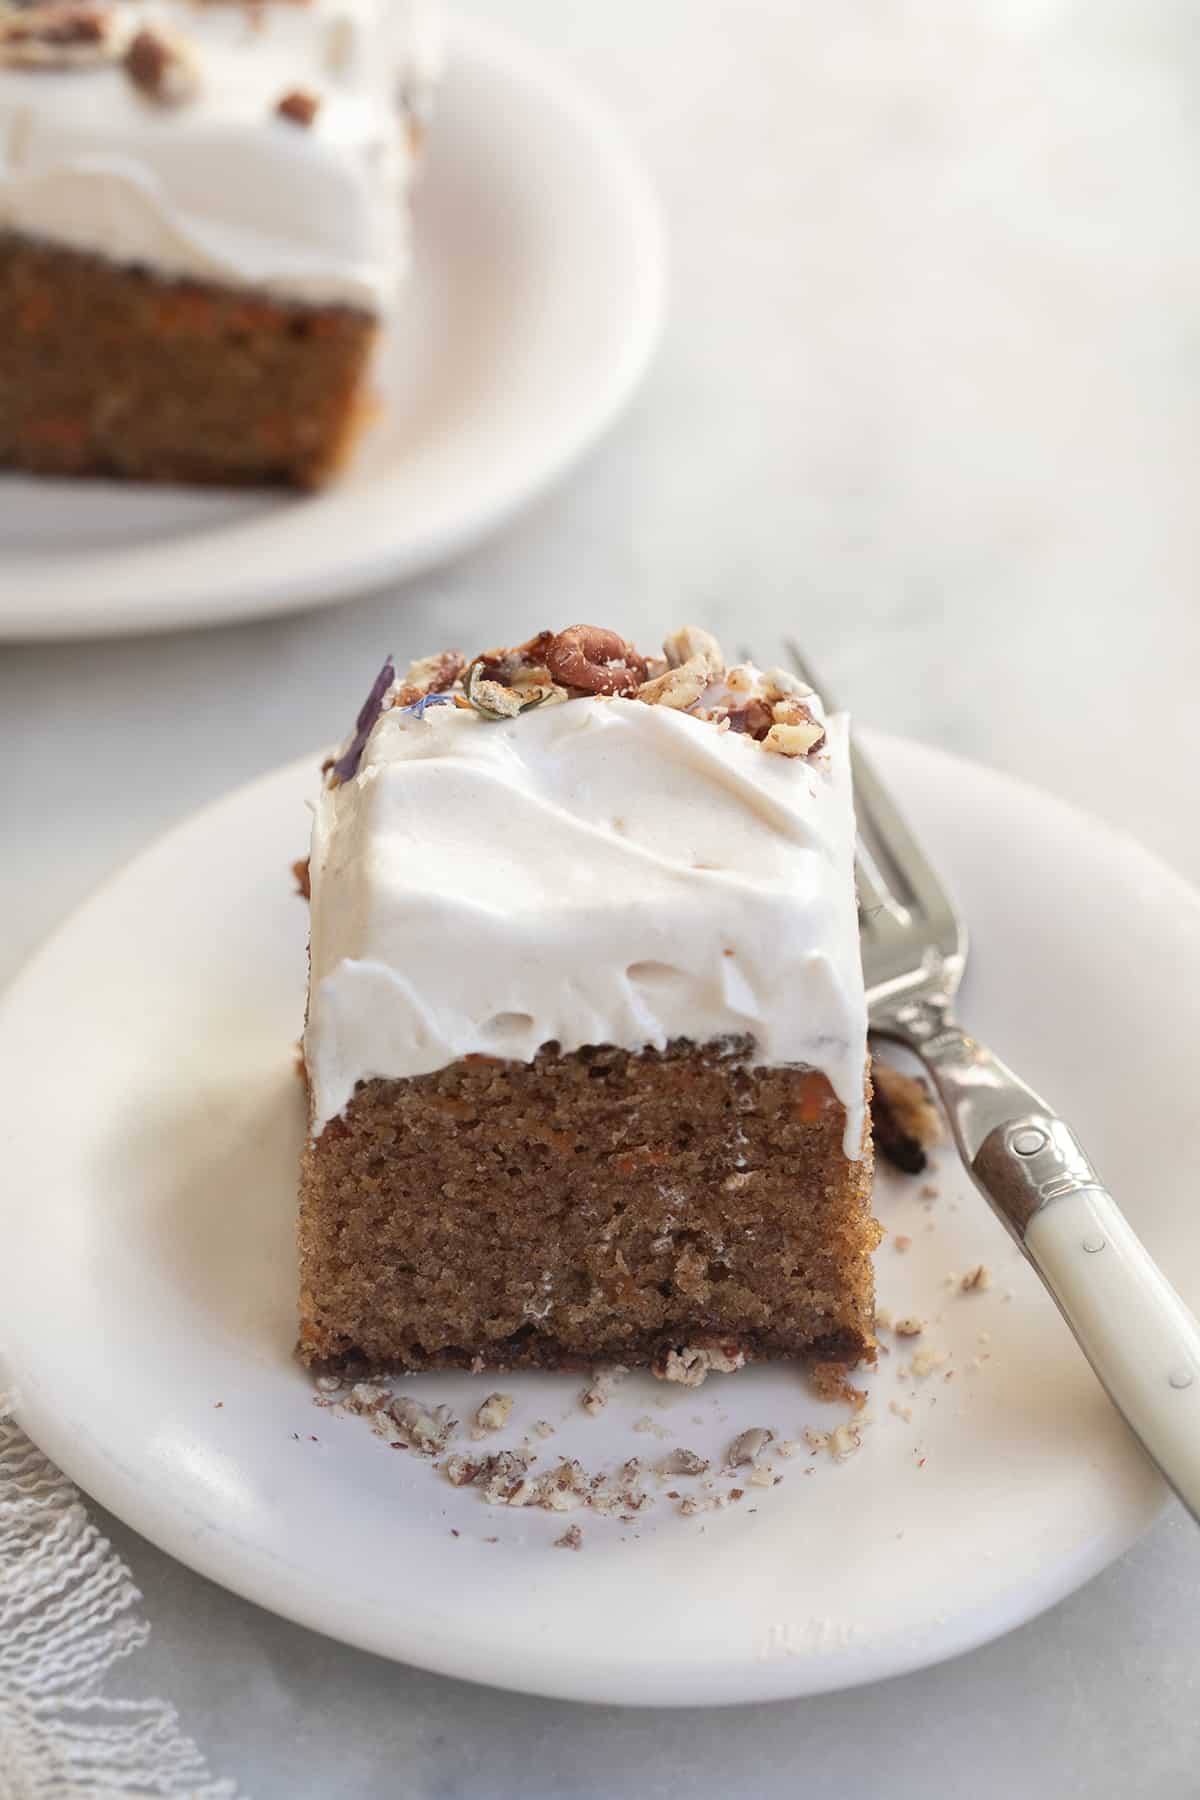 Simple carrot cake slice with frosting.